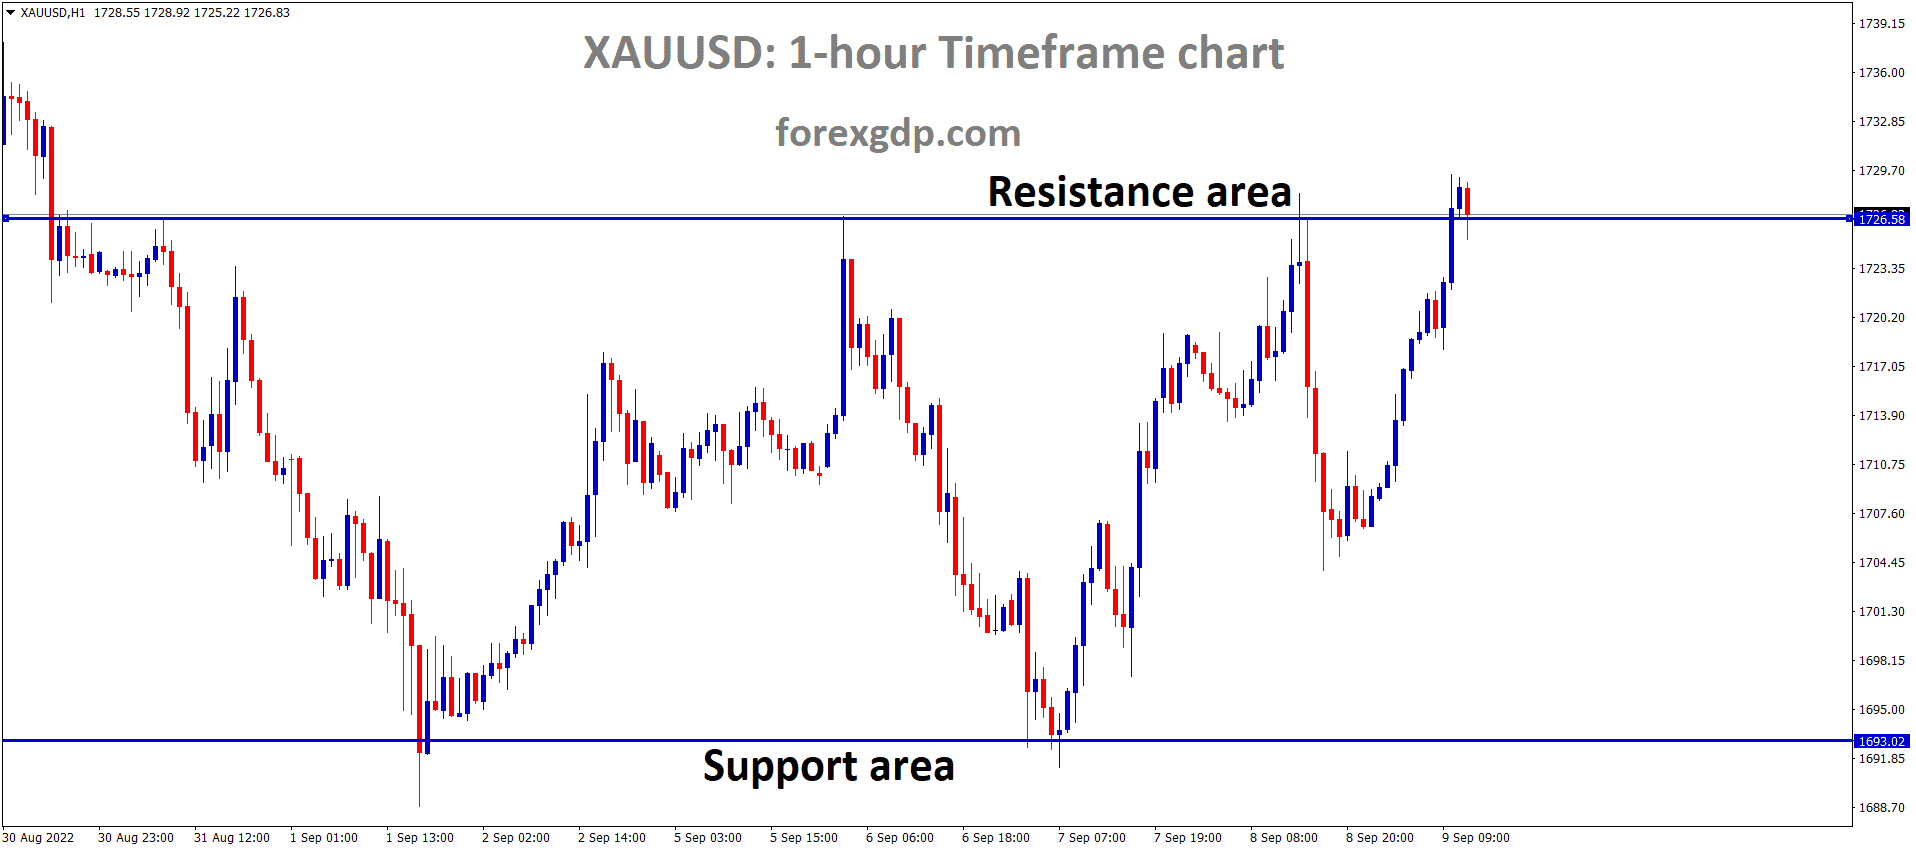 XAUUSD Gold price is moving in the Box pattern and the market has reached the Resistance area of the pattern